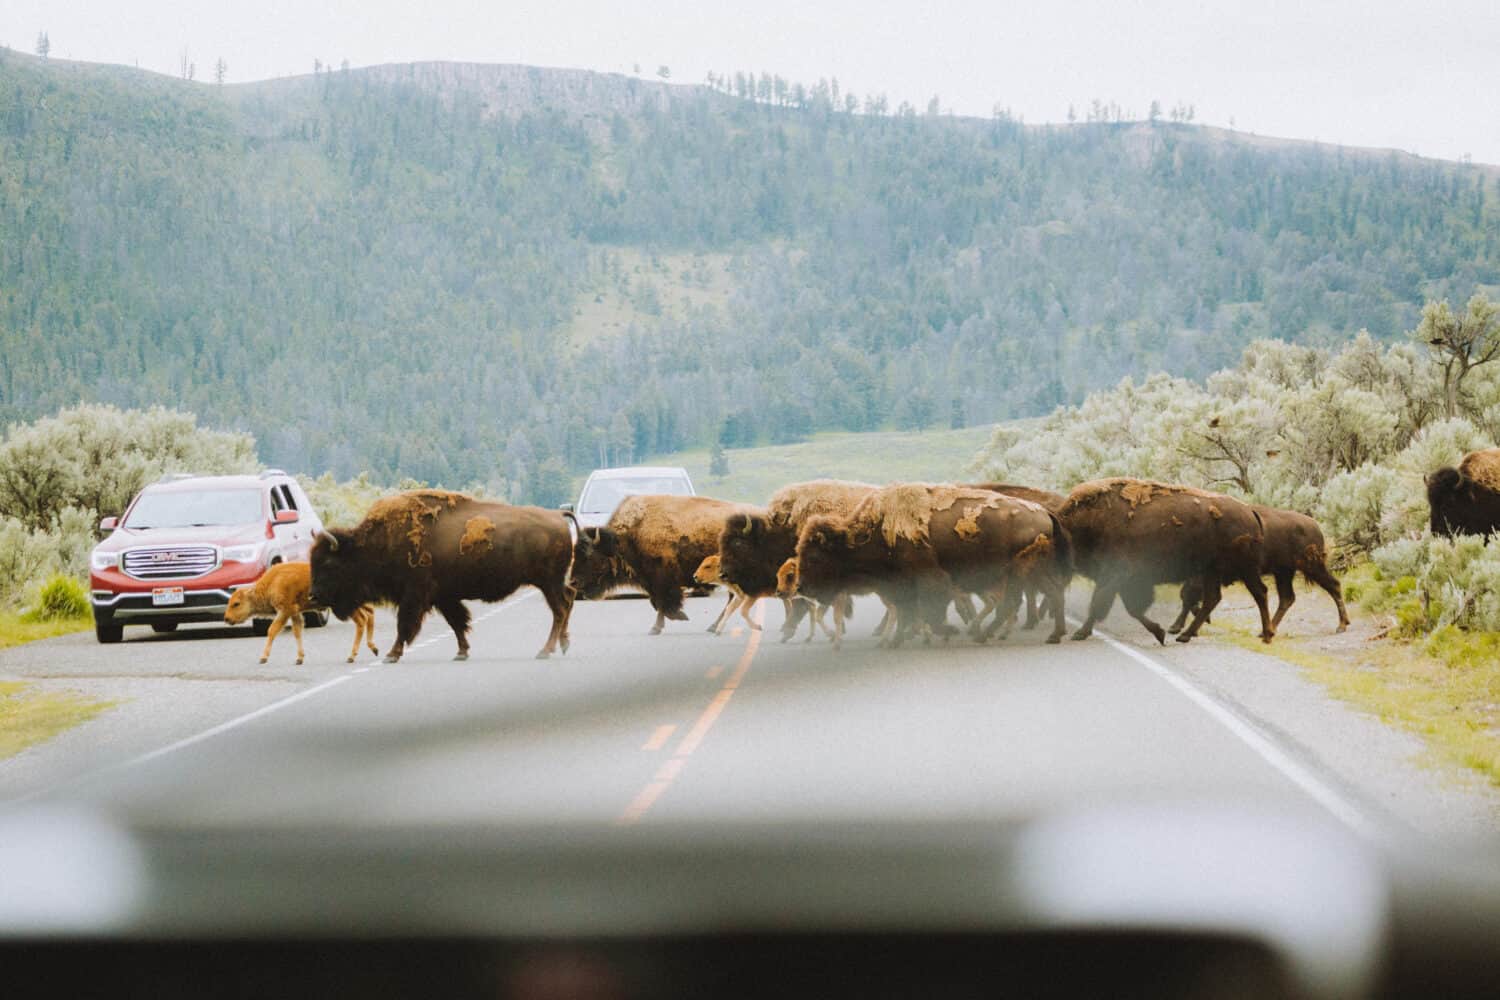 Bison crossing the road at Yellowstone National Park